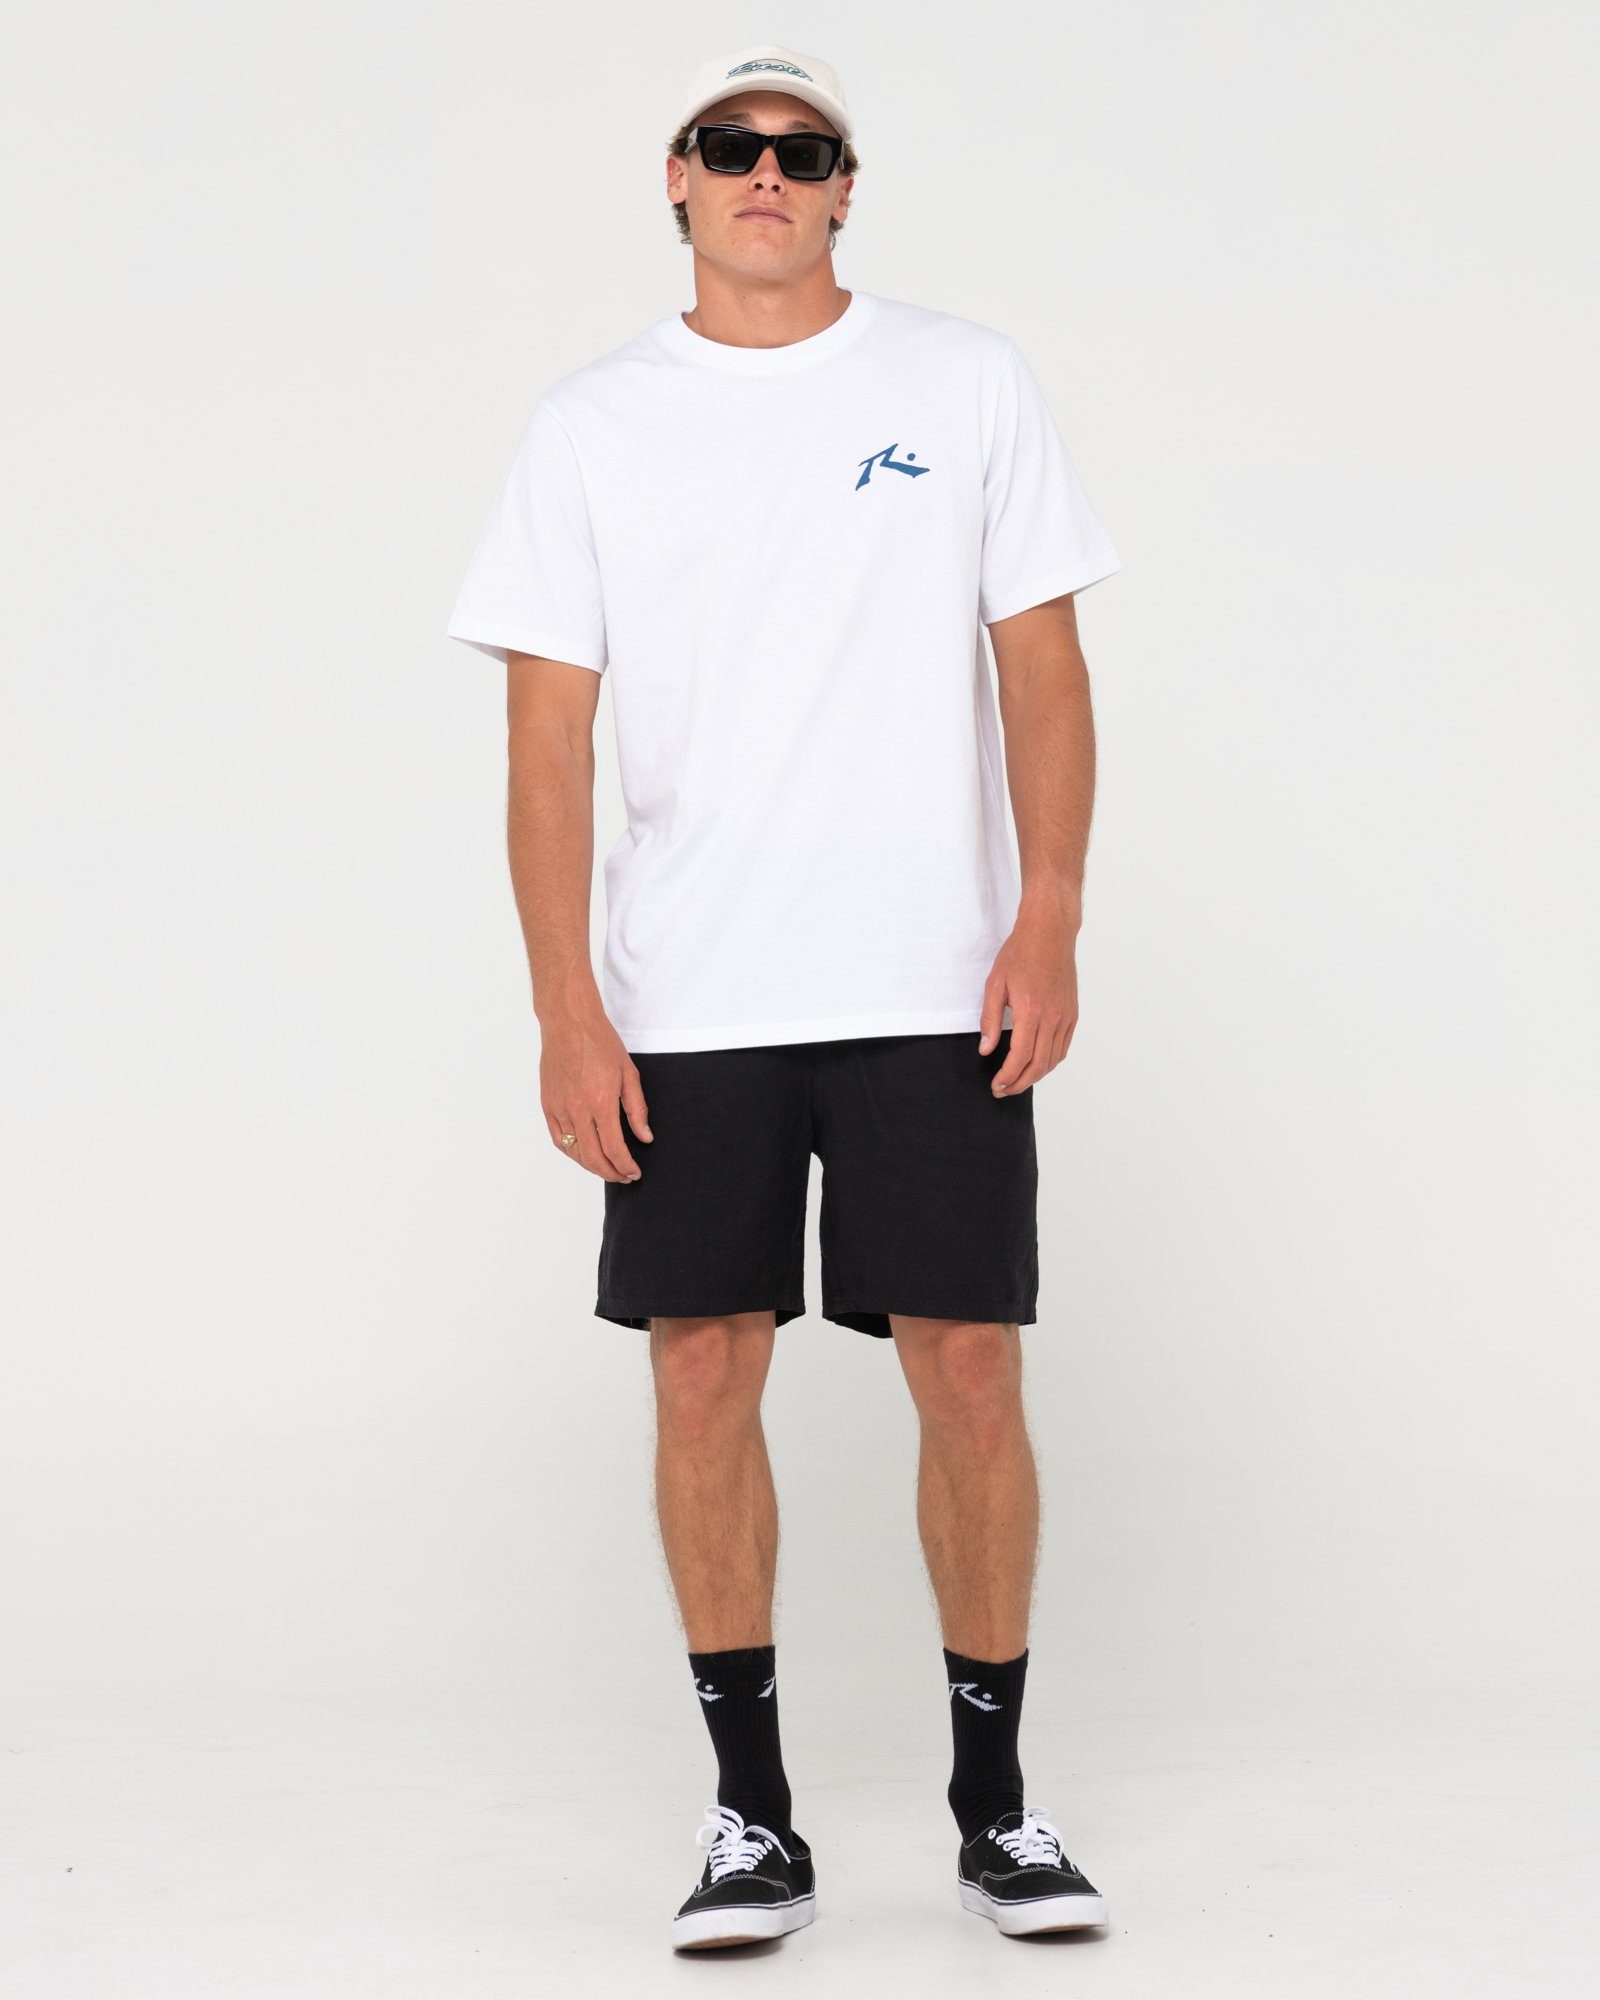 COMPETITION White SHORT T-Shirt Blue SLEEVE / Rusty TEE